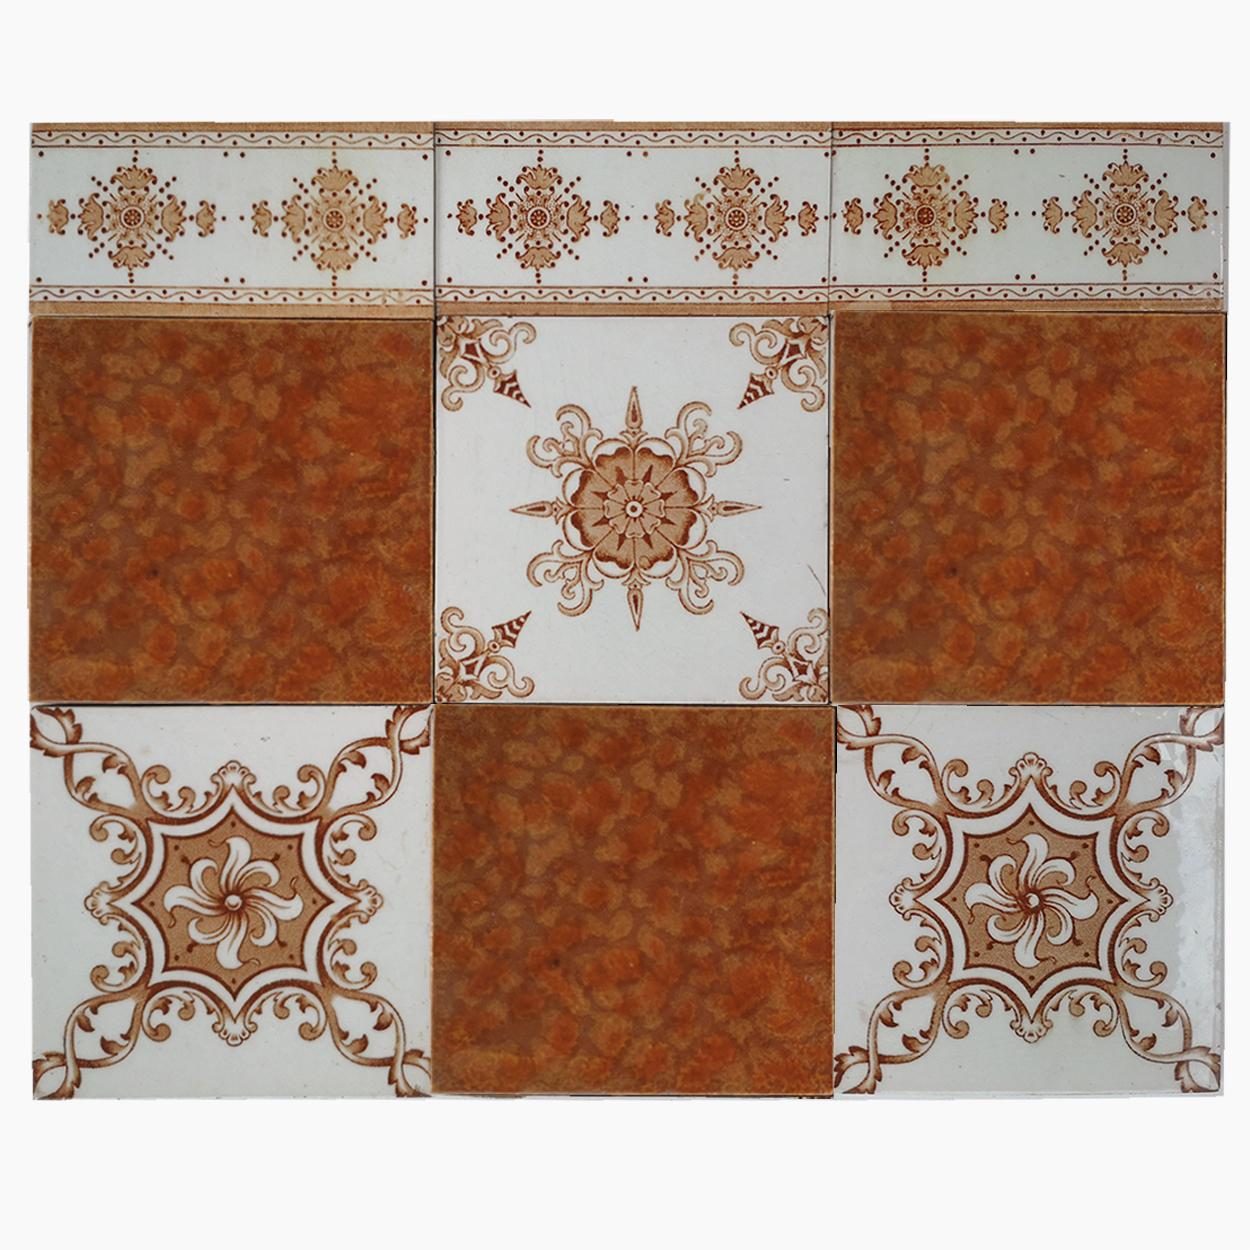 A set of unique antique tiles, with a beautiful Art Deco pattern, Hemiksem circa 1920, Belgium.
In a warm red/brown color. 

The dimensions per tile are 5,9